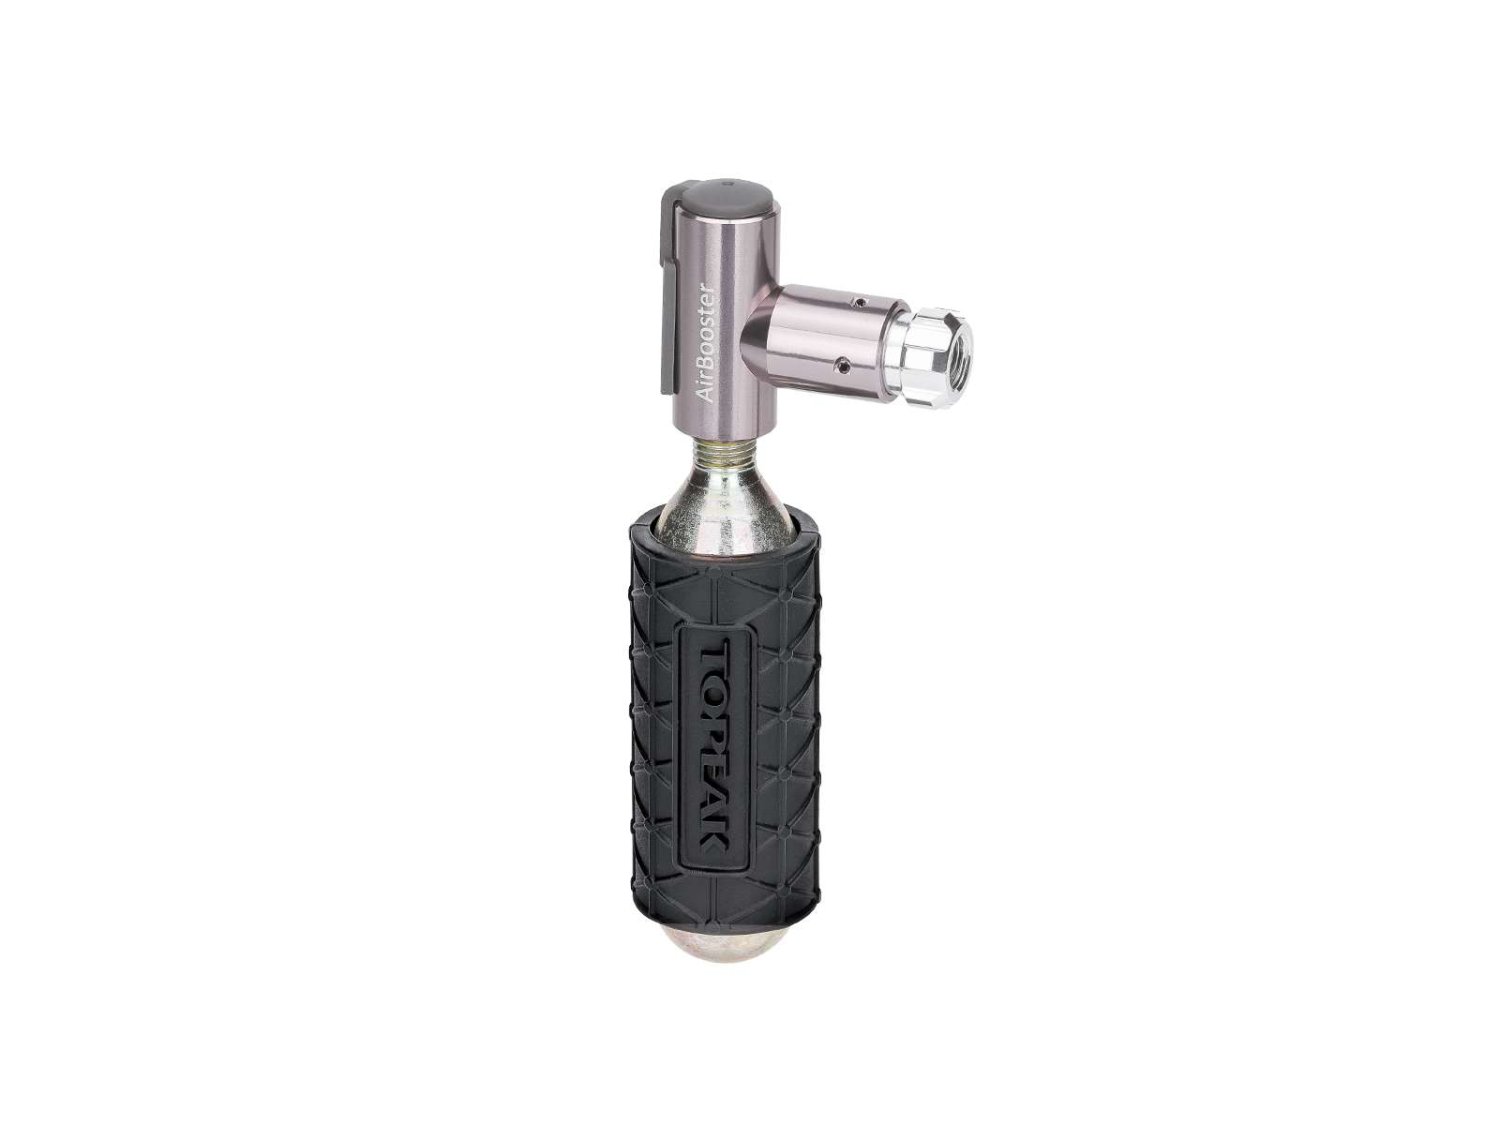    CO2 TOPEAK AIRBOOSTER 16G, TAB-2, : 97266 -  